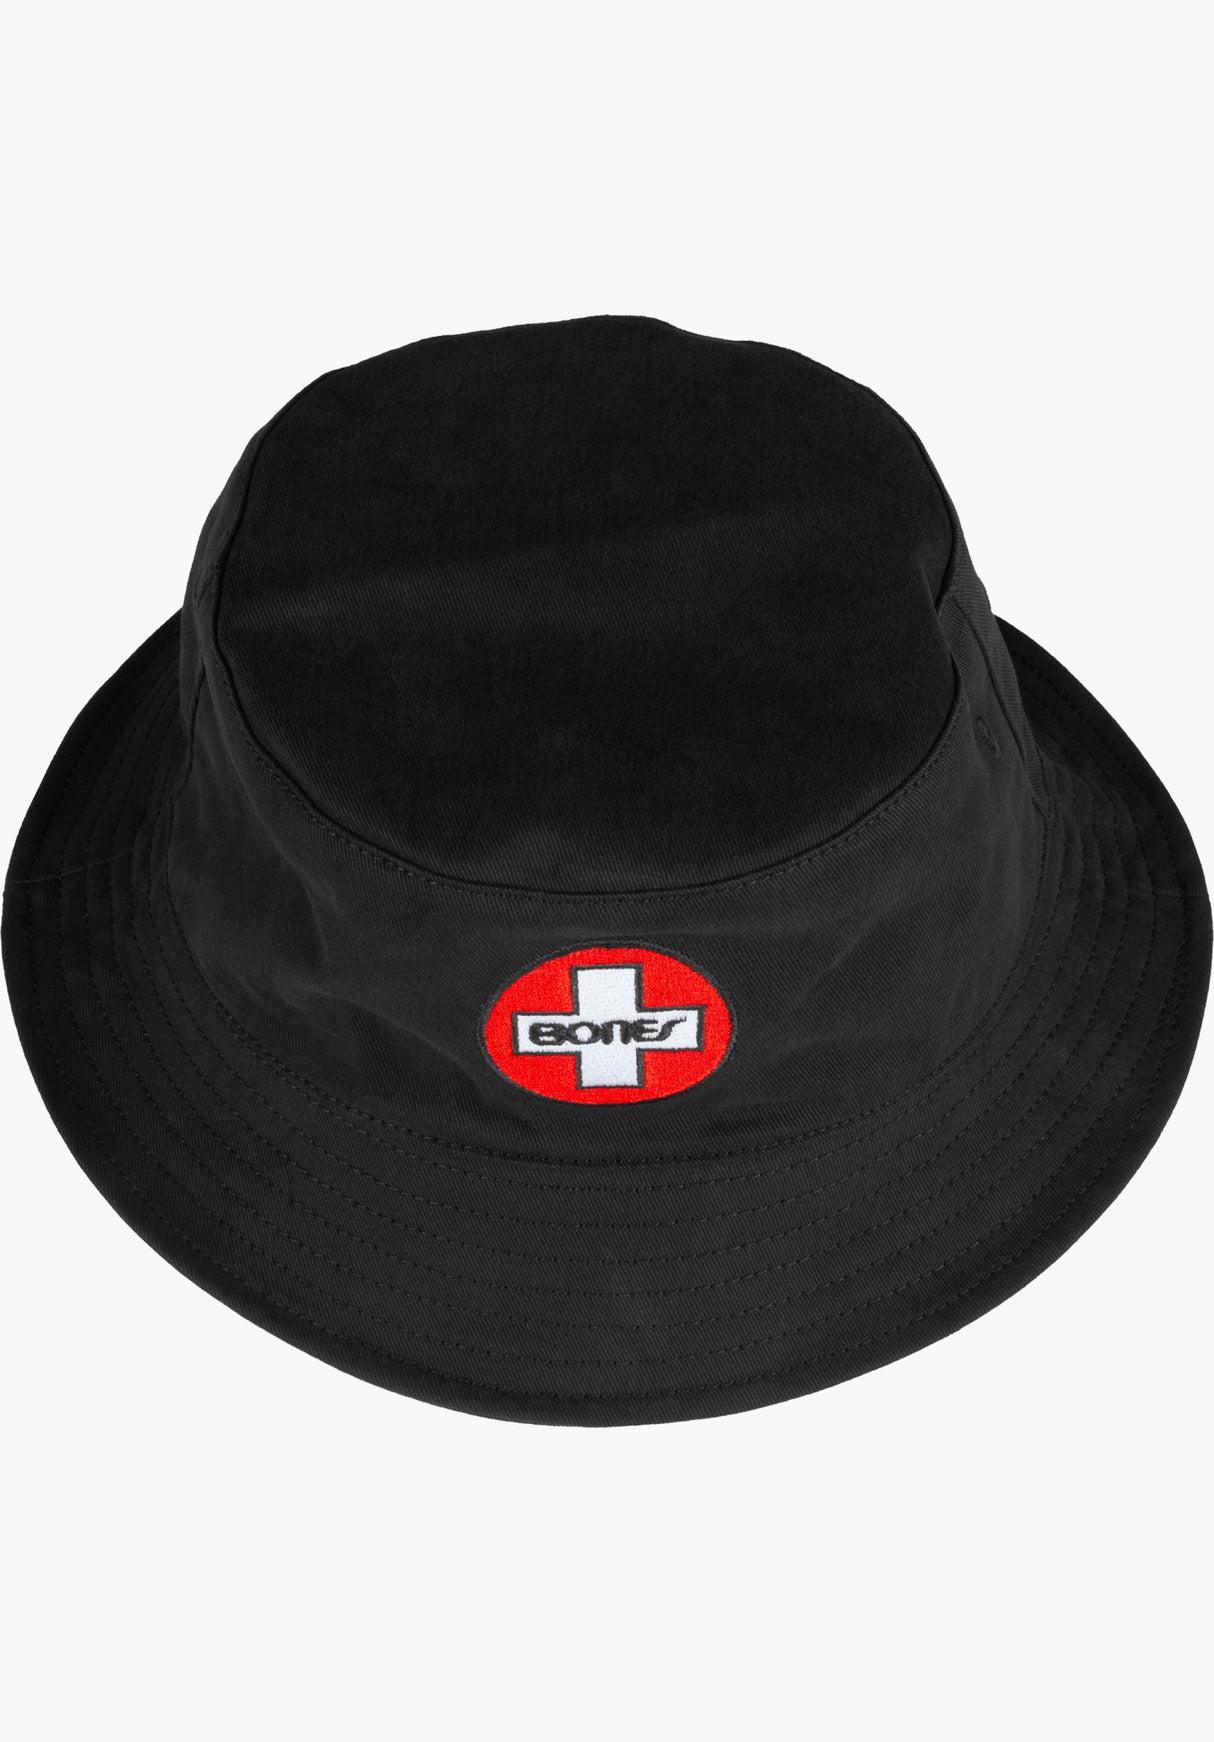 Bucket Hat Reversible black-red Close-Up2